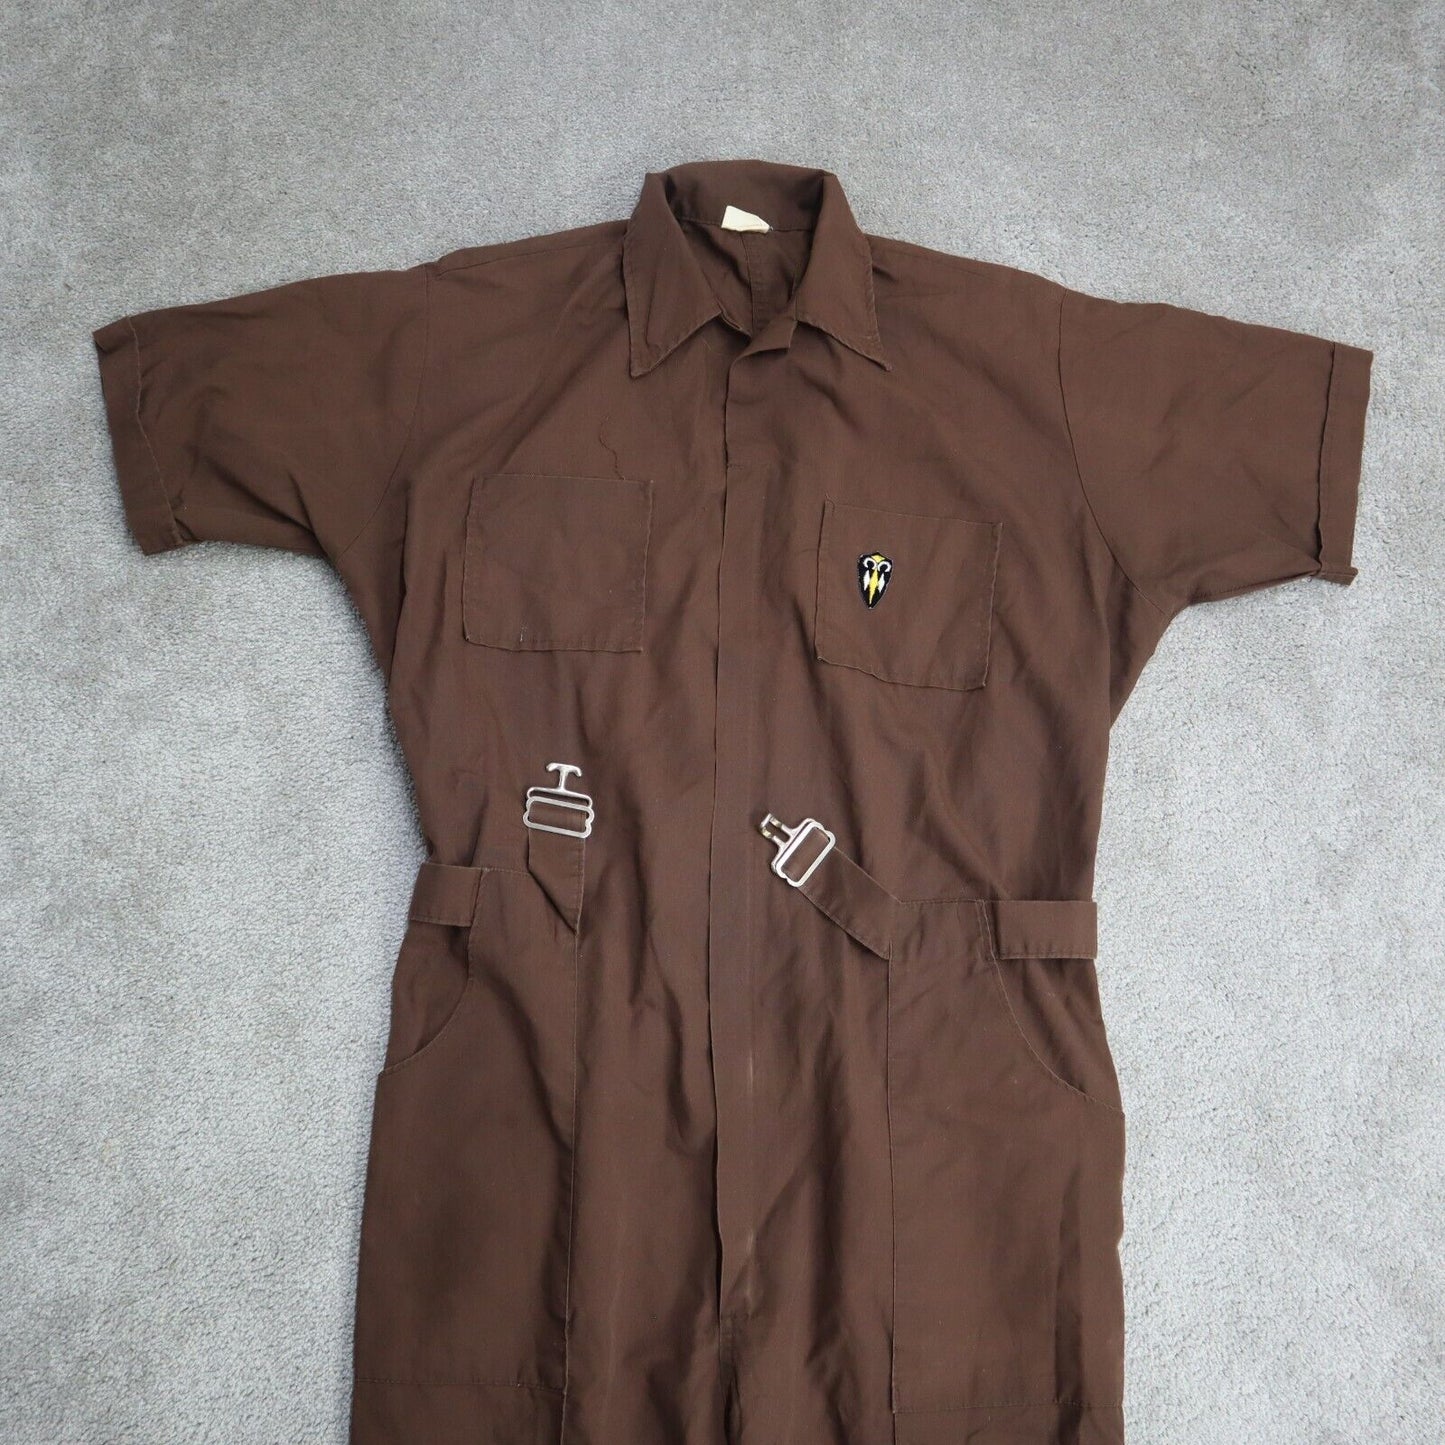 Vintage Men Insulated Coverall Jumpsuit Short Sleeves Tie Waist Brown Size Large